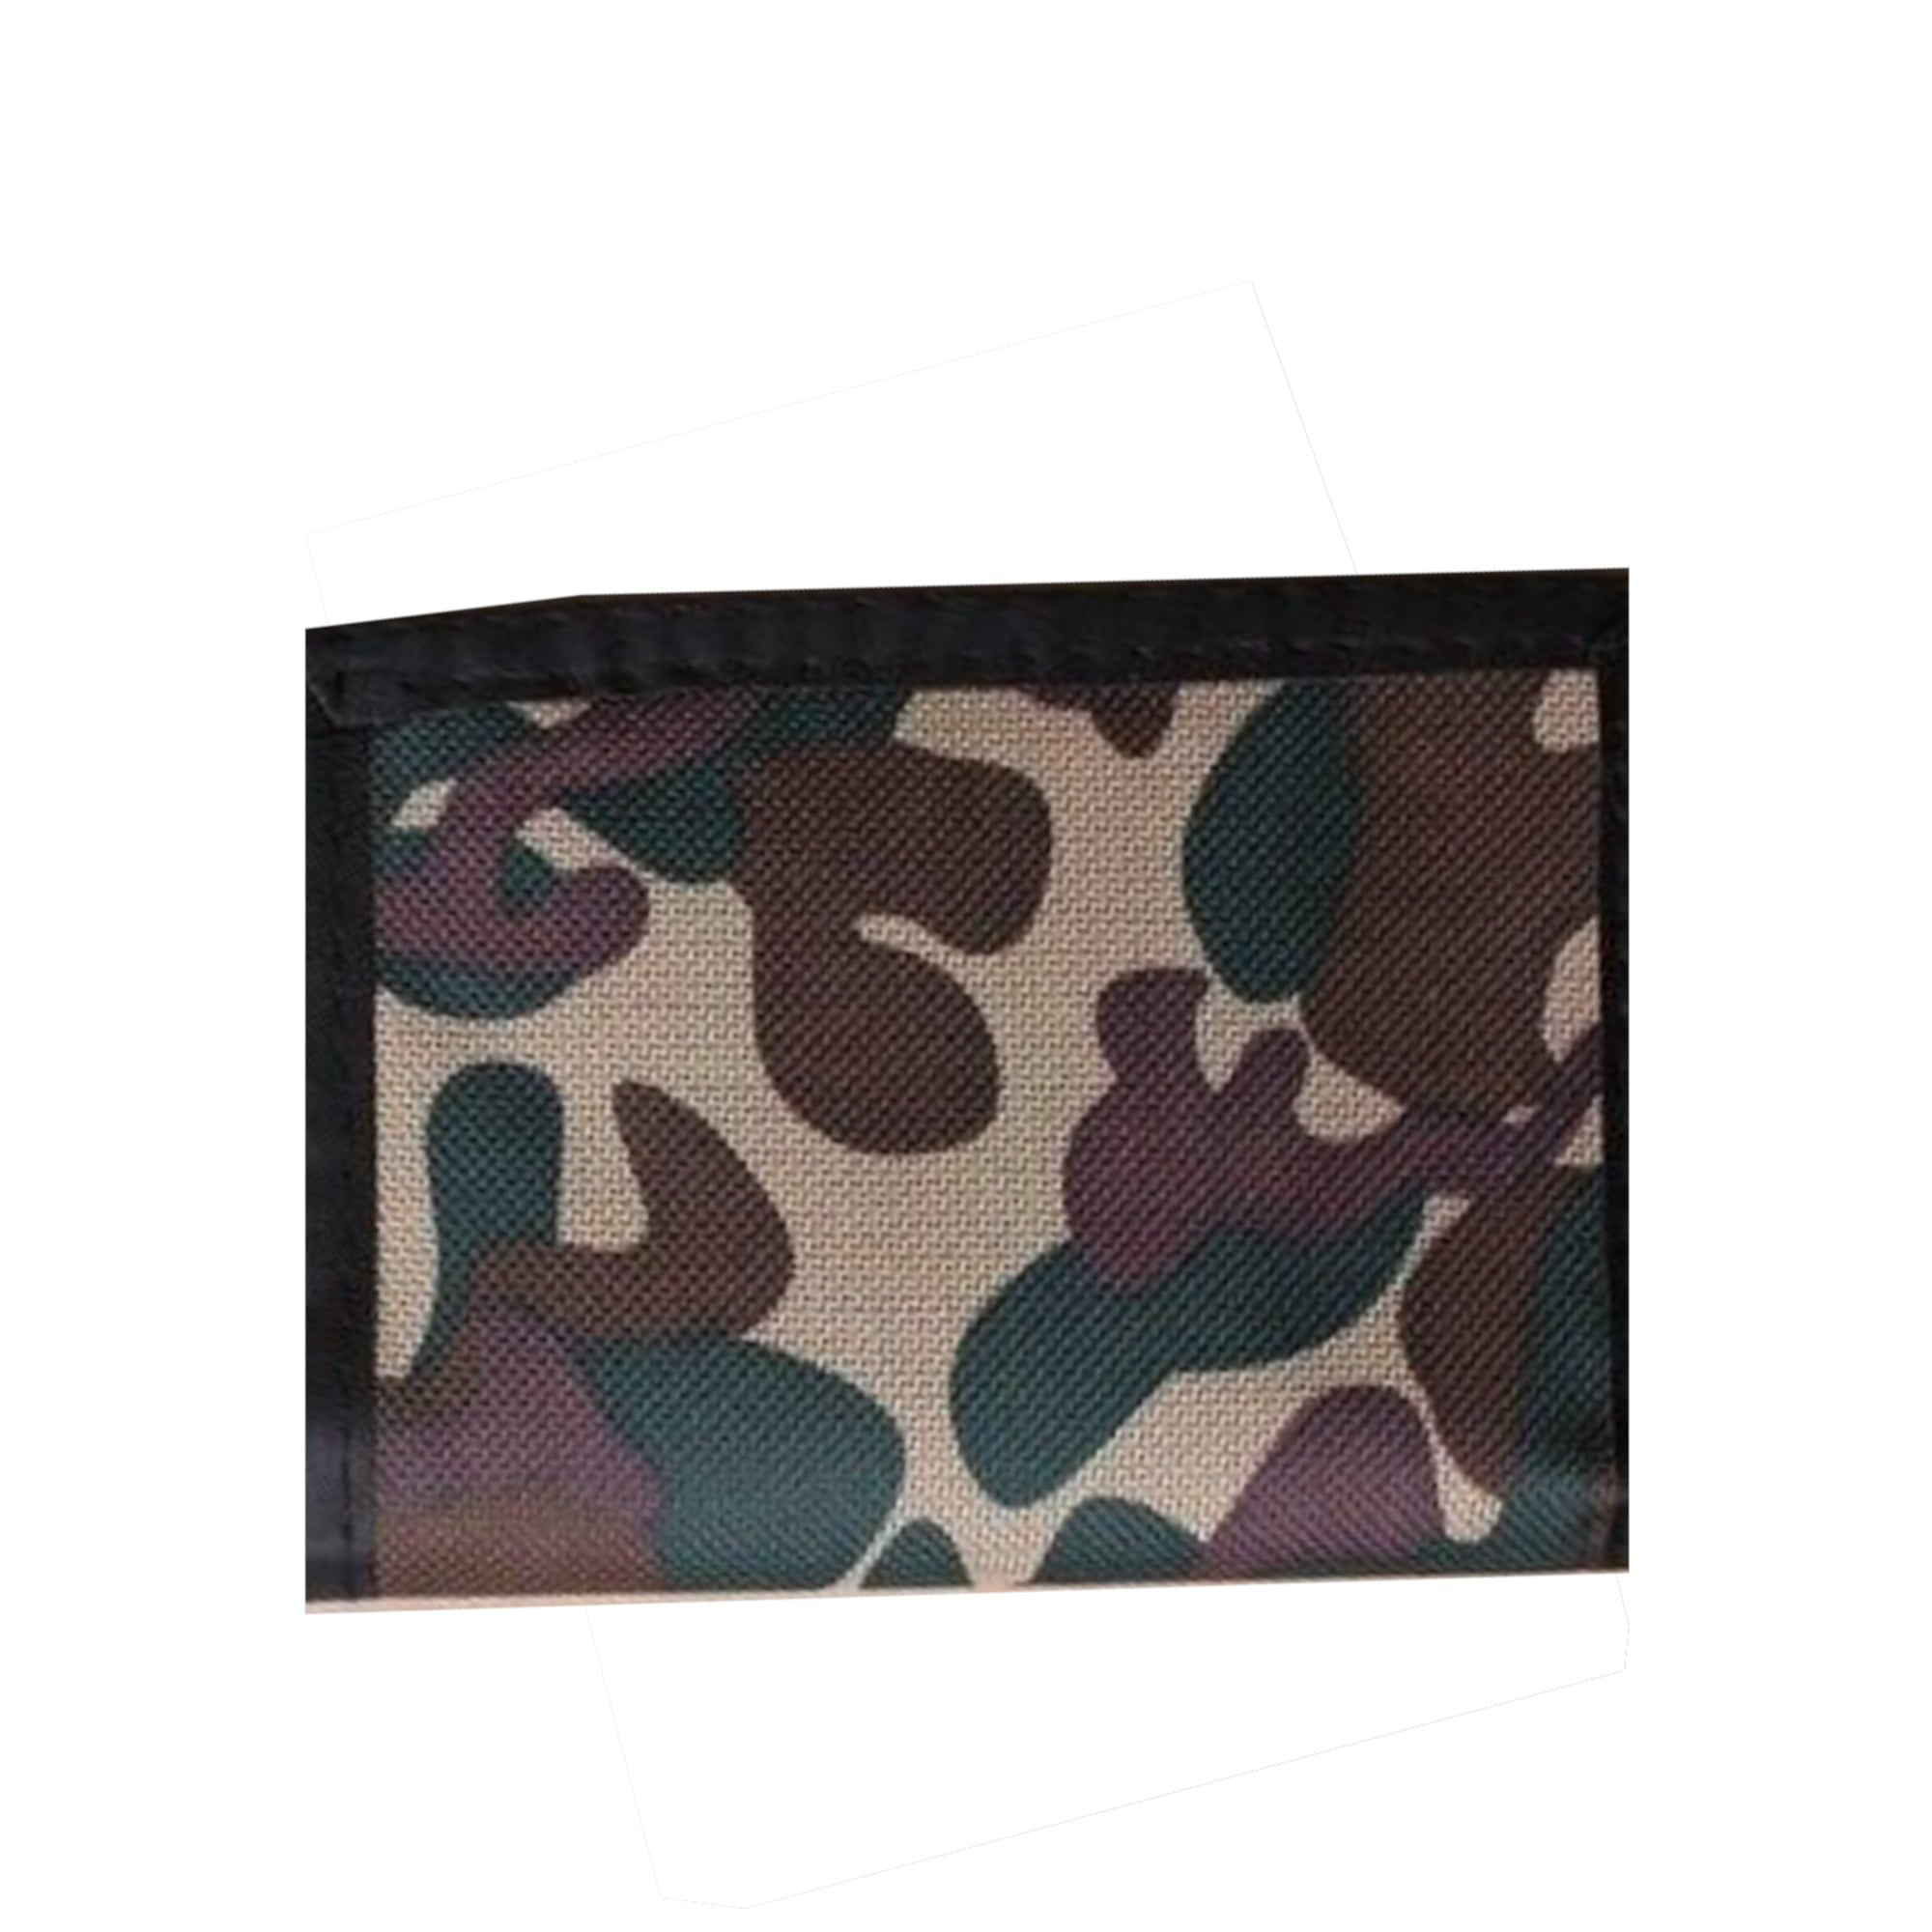 Camouflage wallet in light green